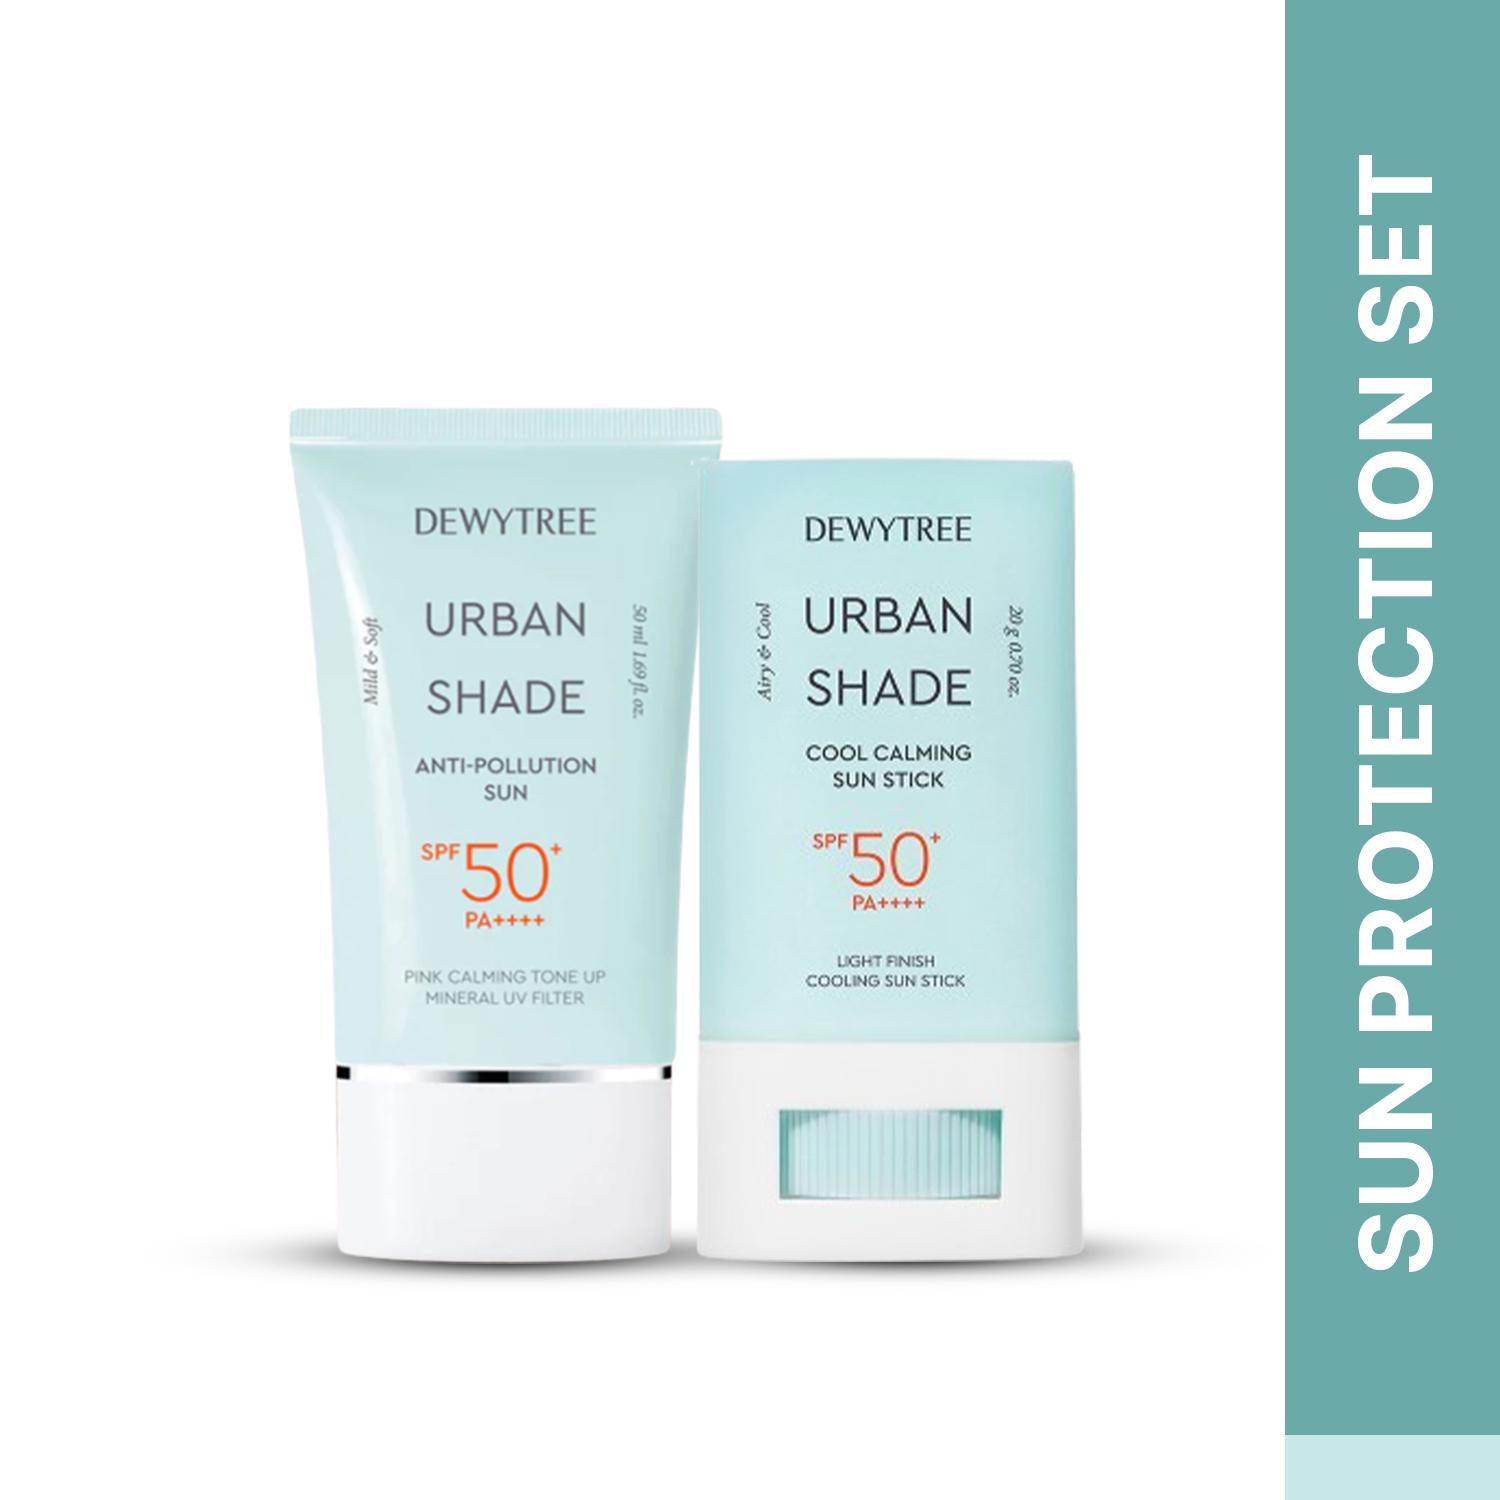 Dewytree | Dewytree Urban Shade Anti-Pollution Sunscreen And Cool Calming Sun Stick Combo